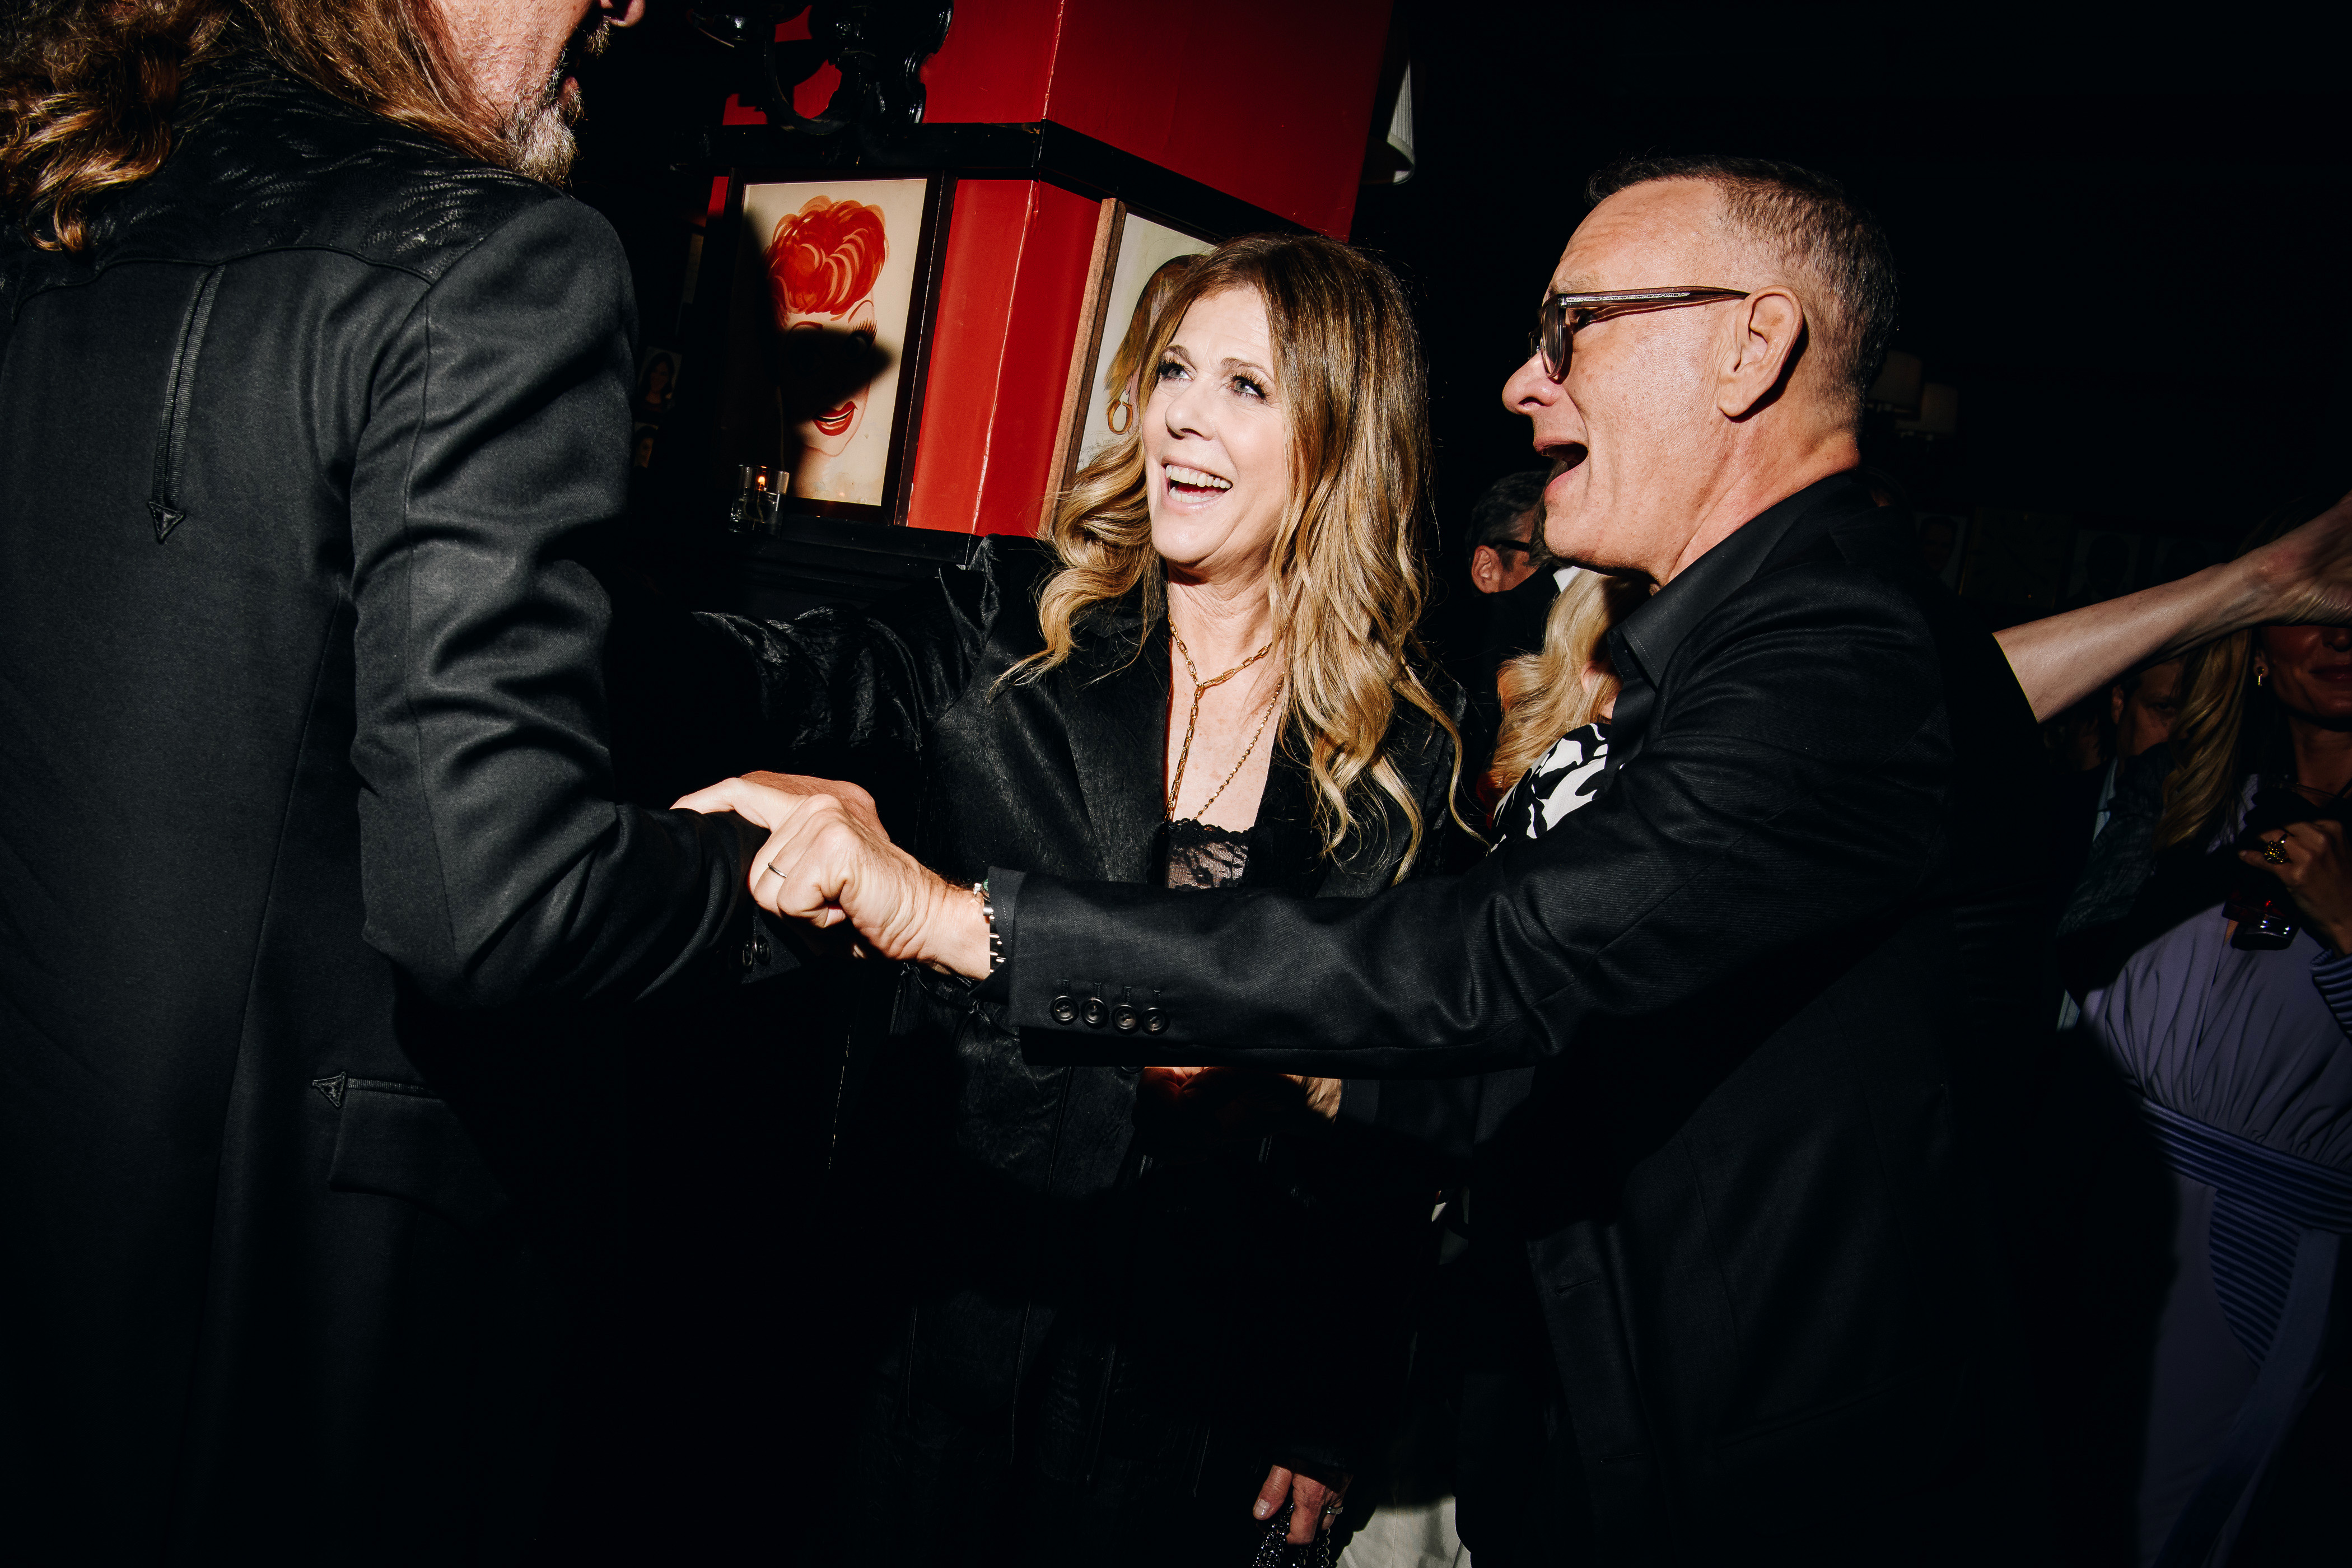 Rita Wilson and Tom Hanks at the premiere of "Asteroid City" in New York City on June 13, 2023 | Source: Getty Images